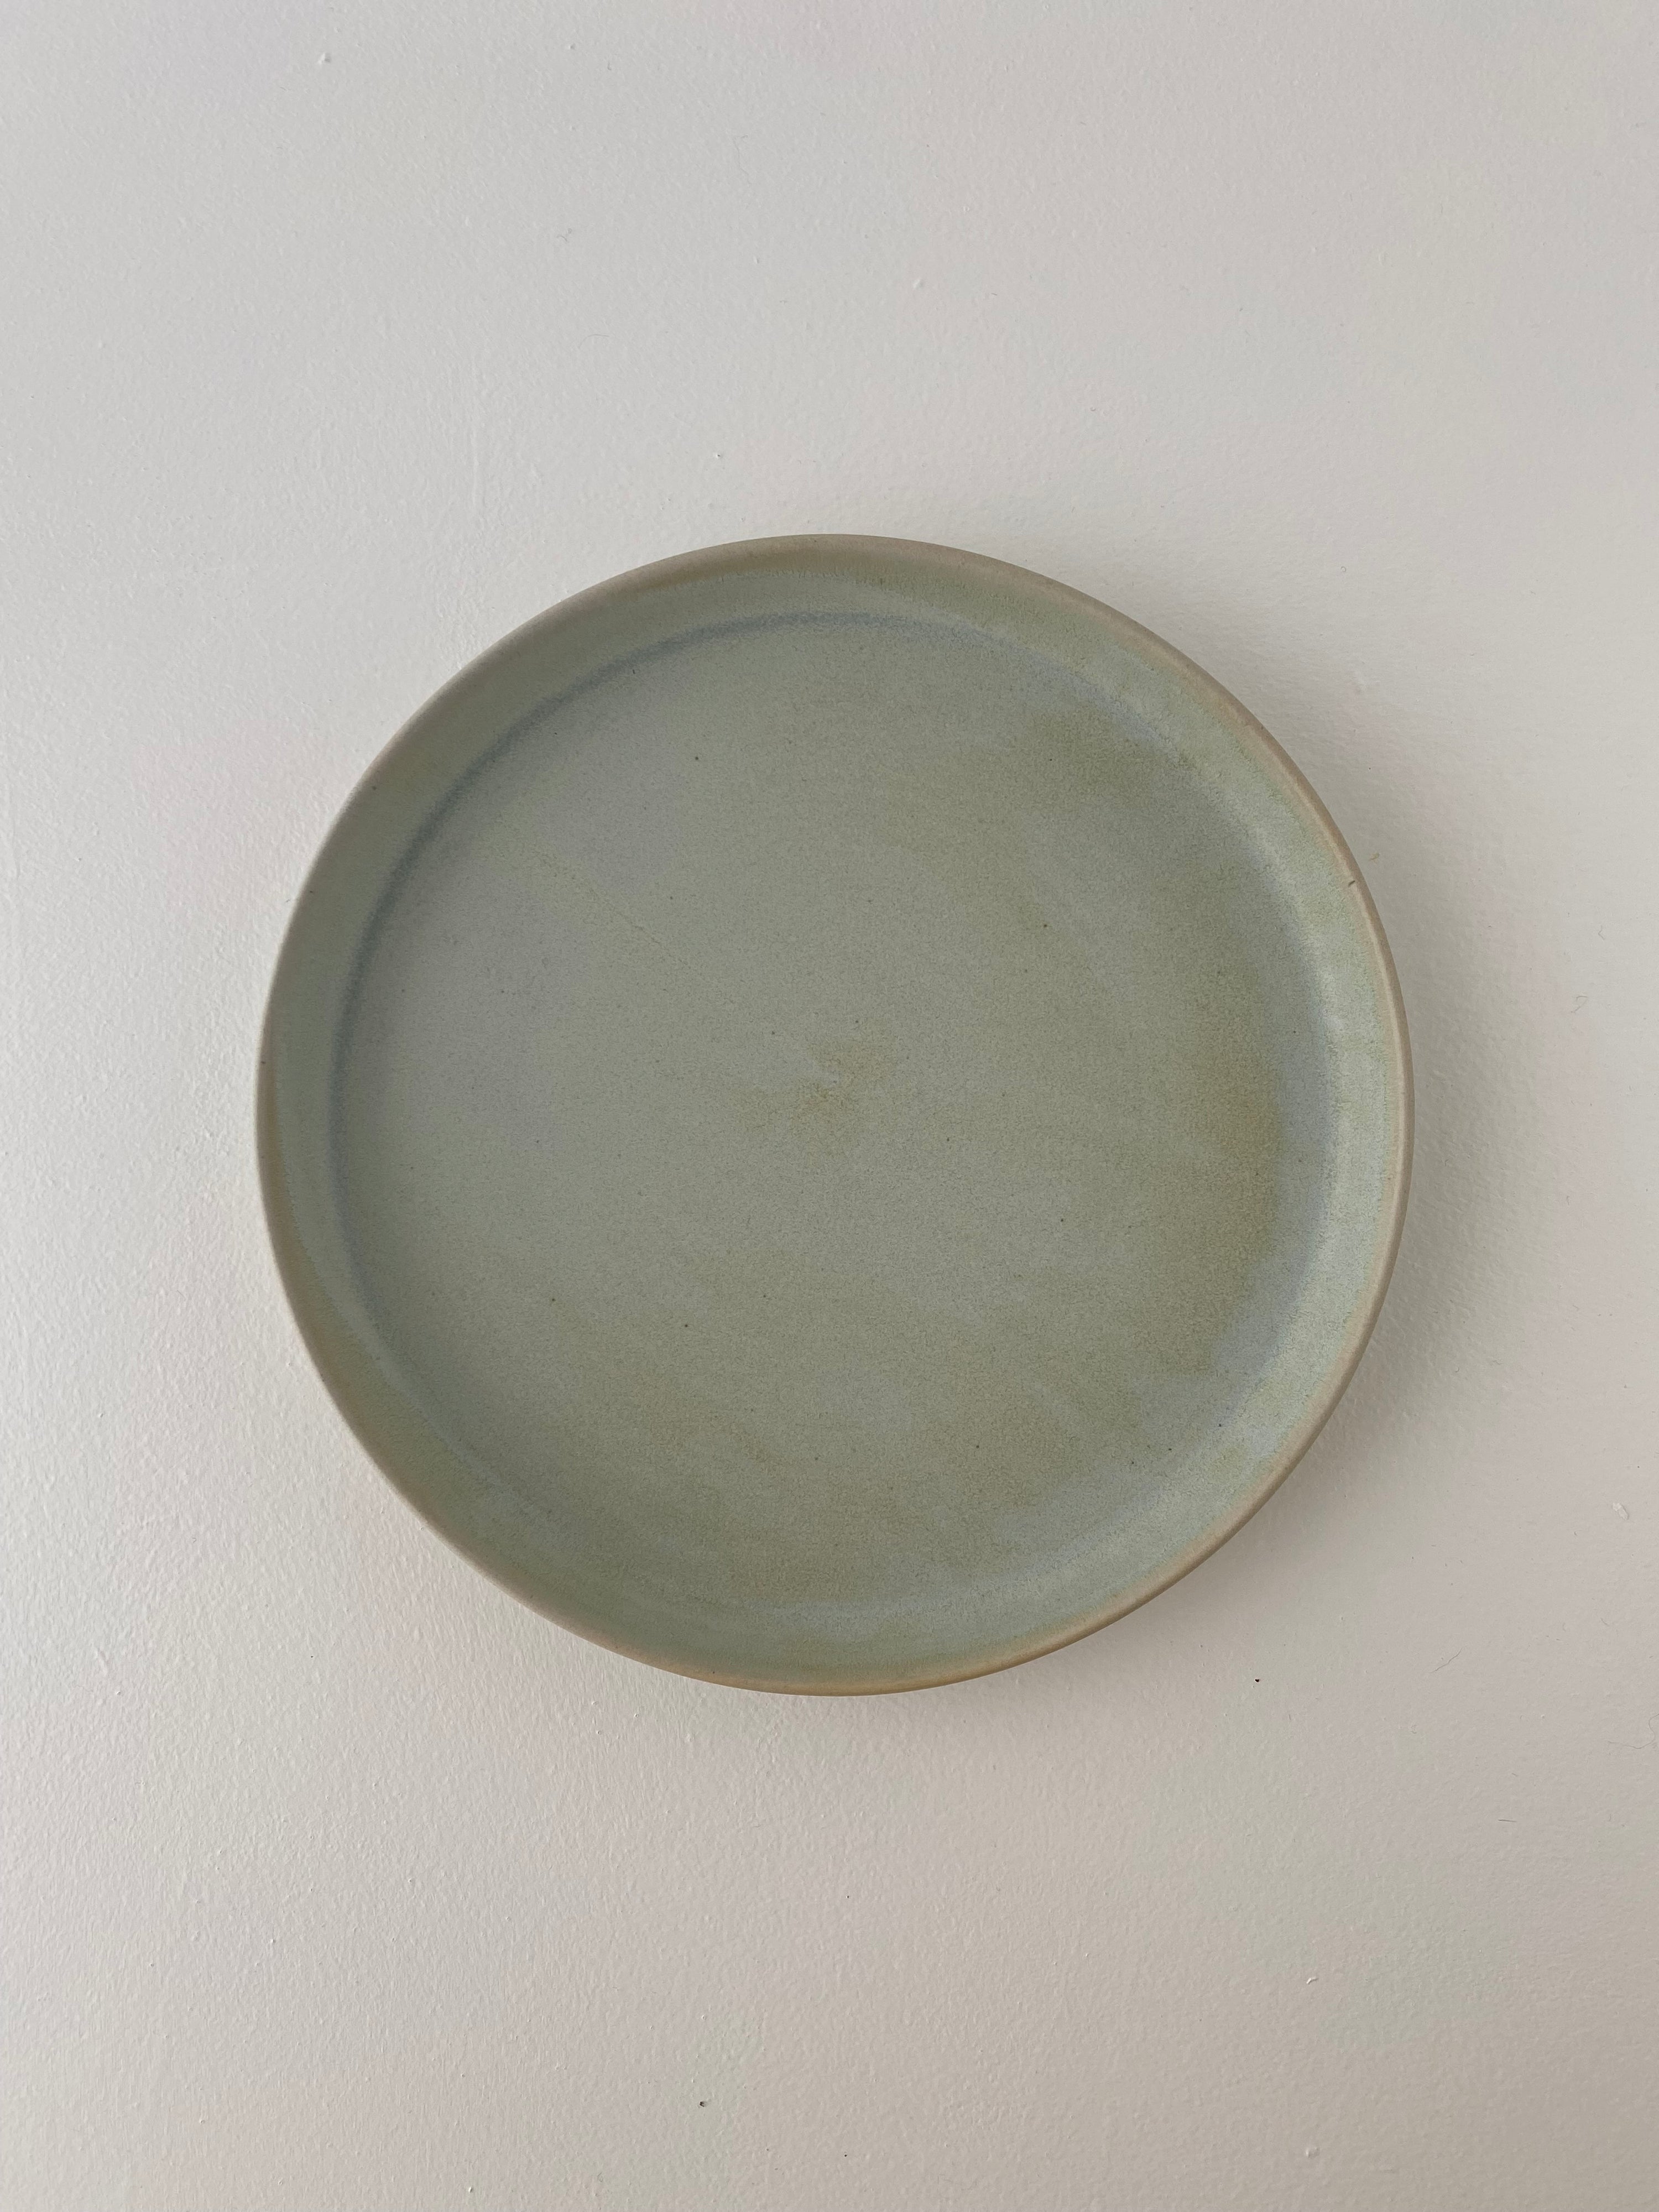 Toto Plate, Mint